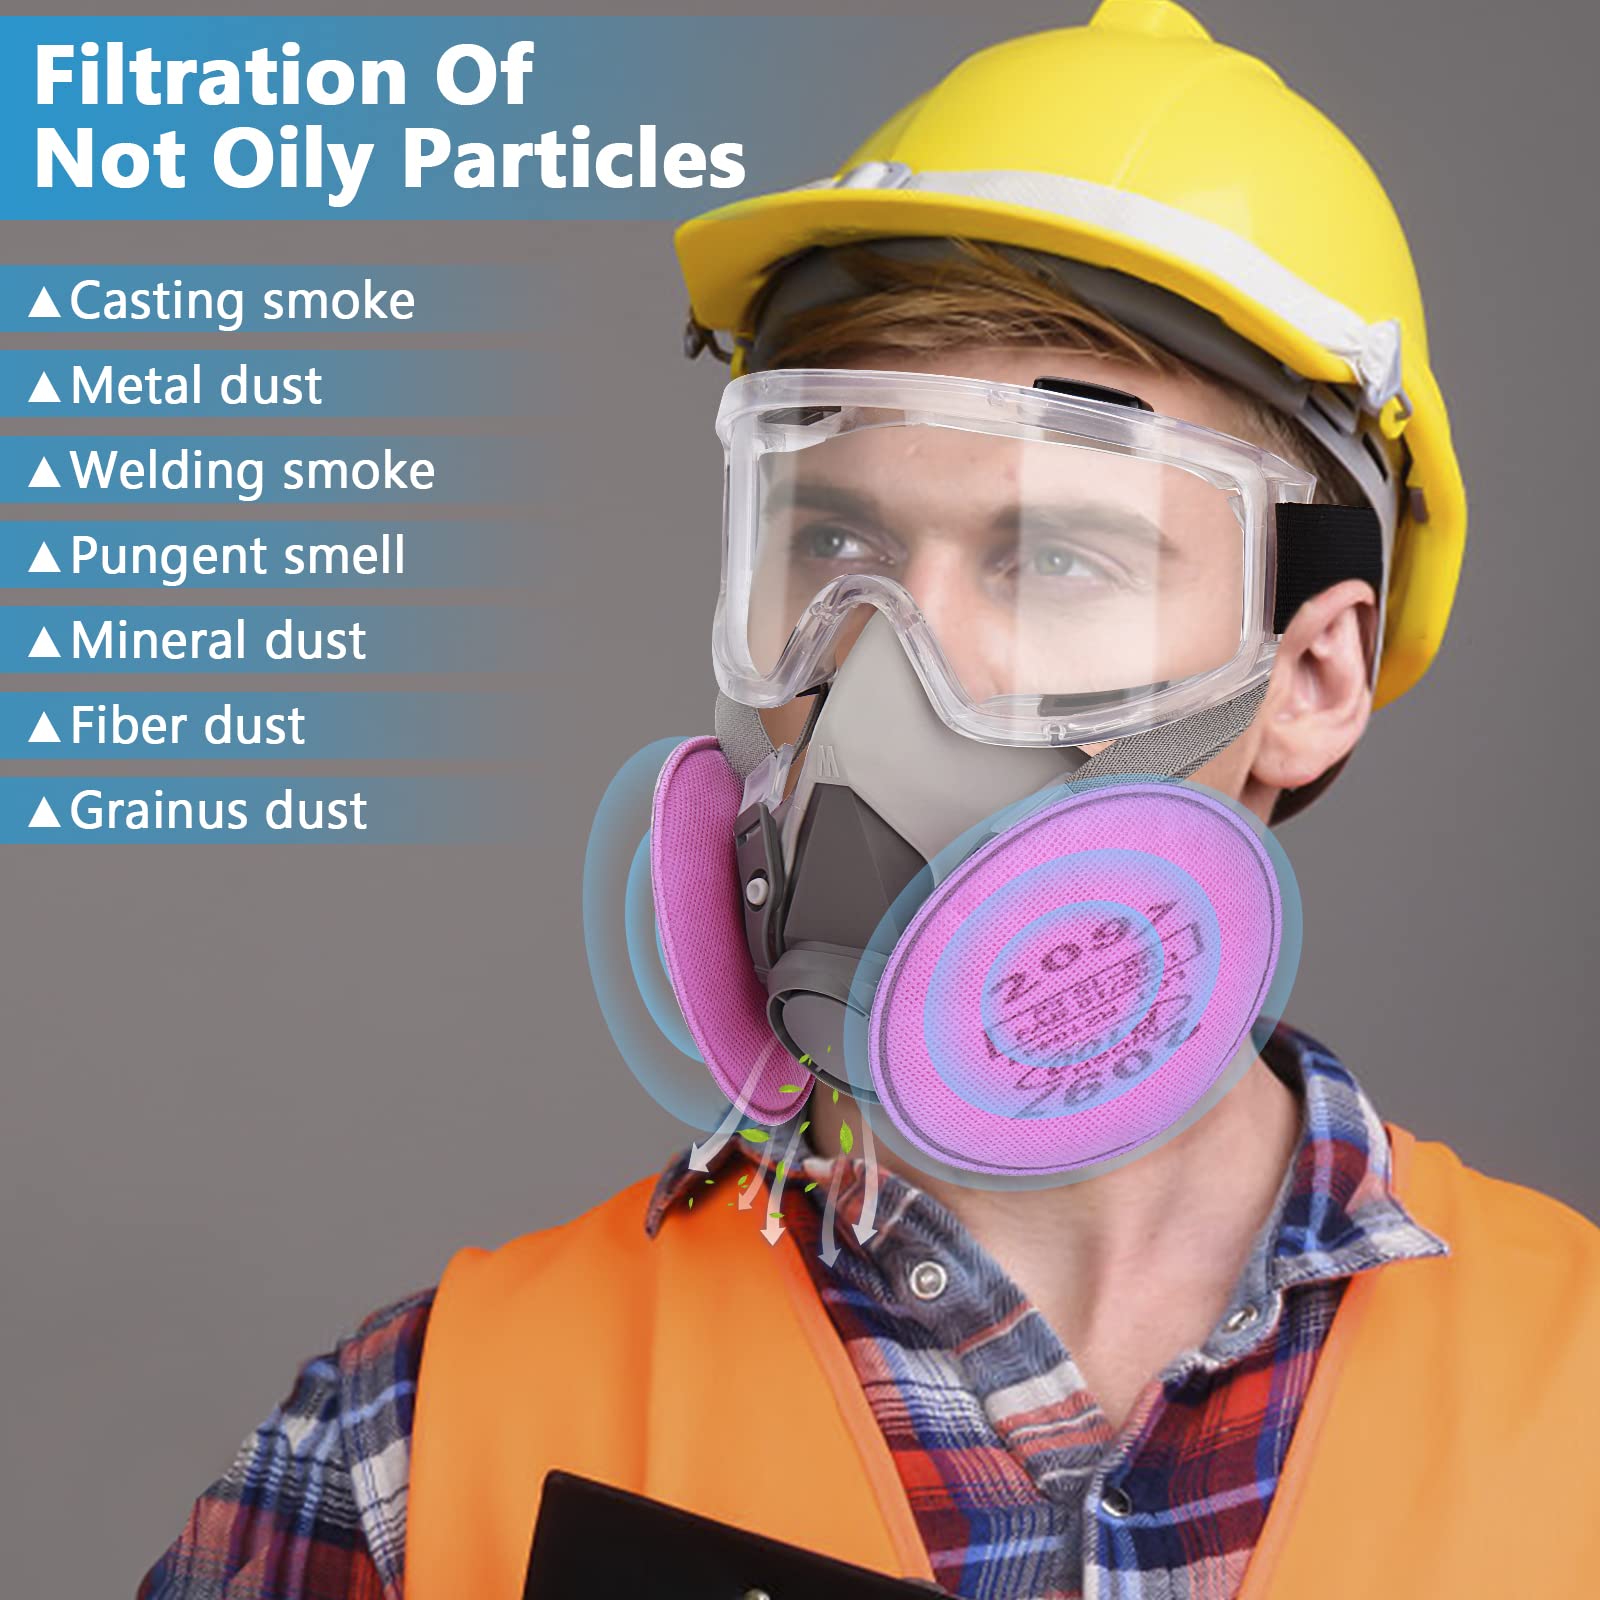 KAMZSZMF Half Facepiece with 4pcs 2097 Filter and Goggles, Reusable Respirator Mask Used for Epoxy resin, Dust, Paint, Organic Vapors, Welding, Grinding, Cutting